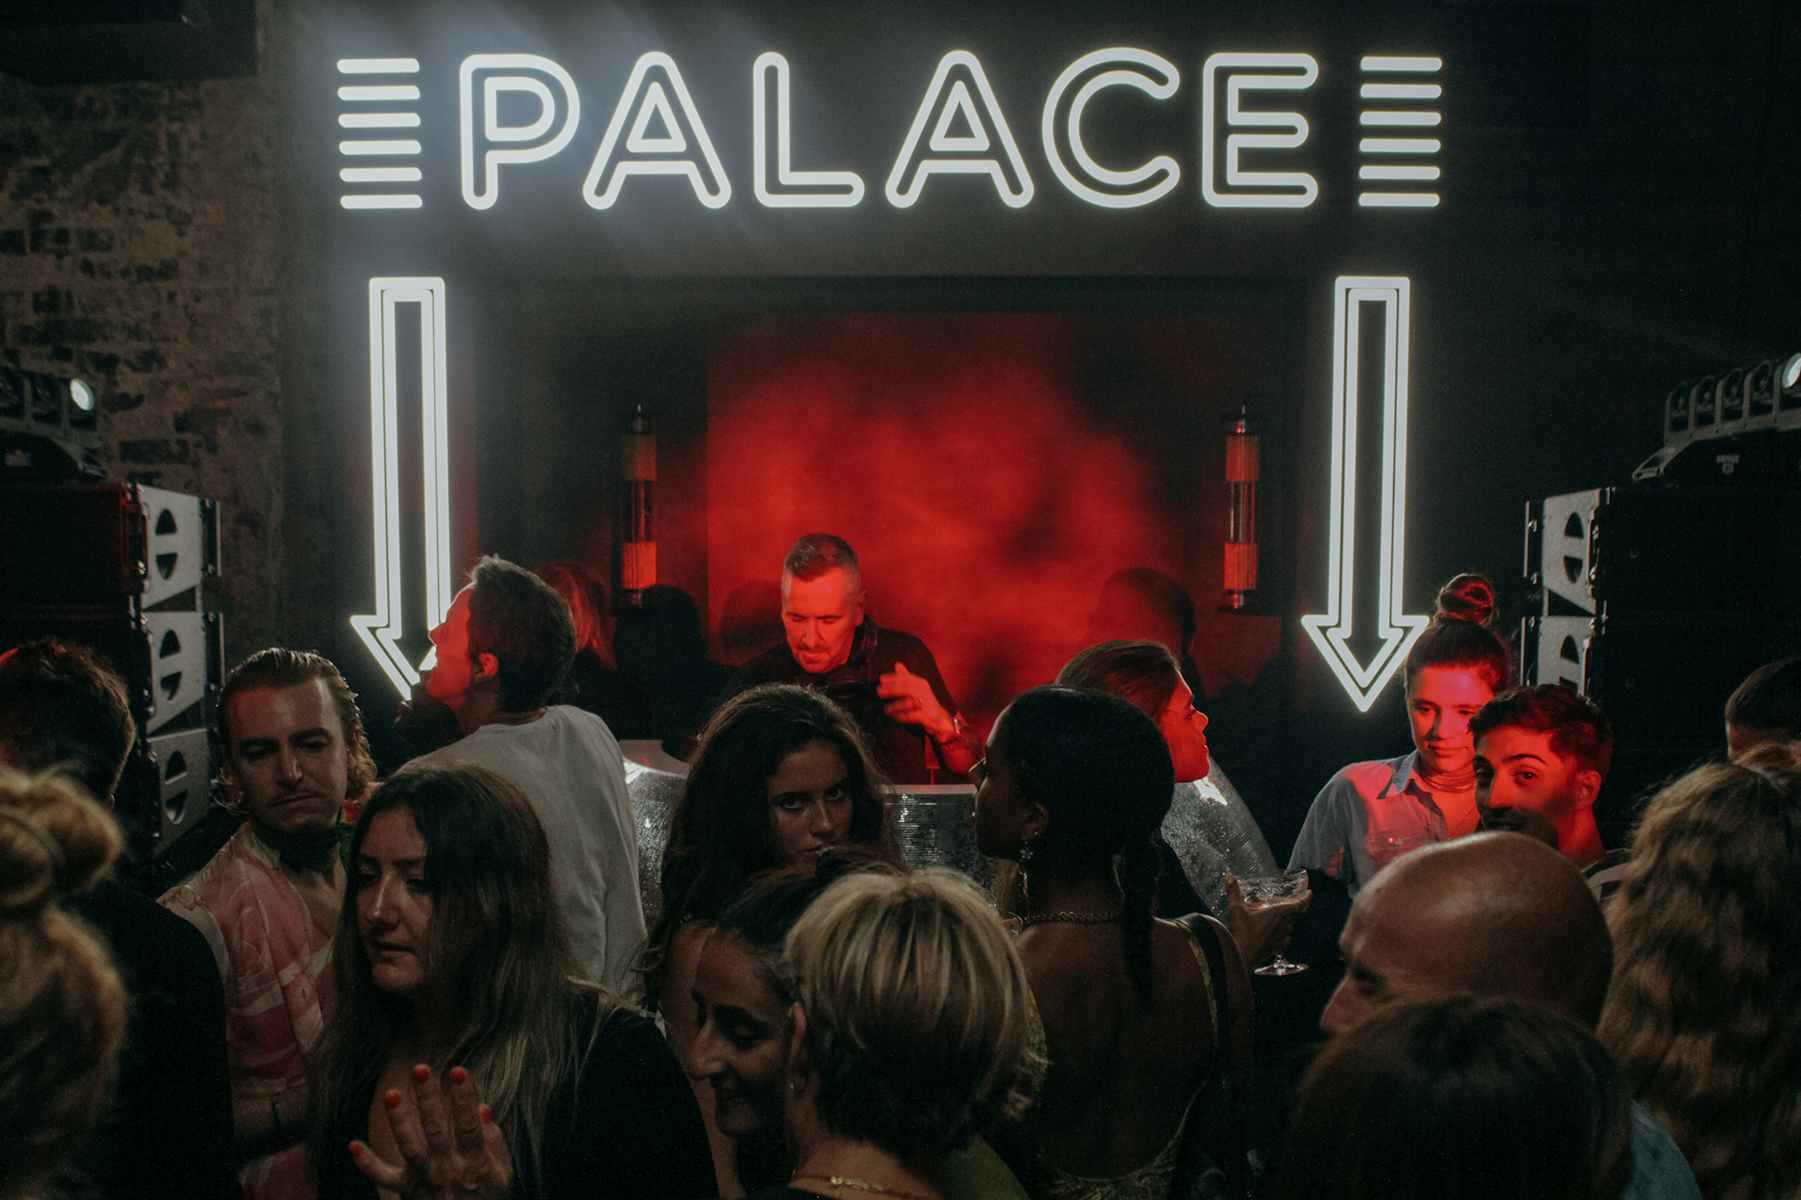 Christian Louboutin's big nights at Le Palace - The Face